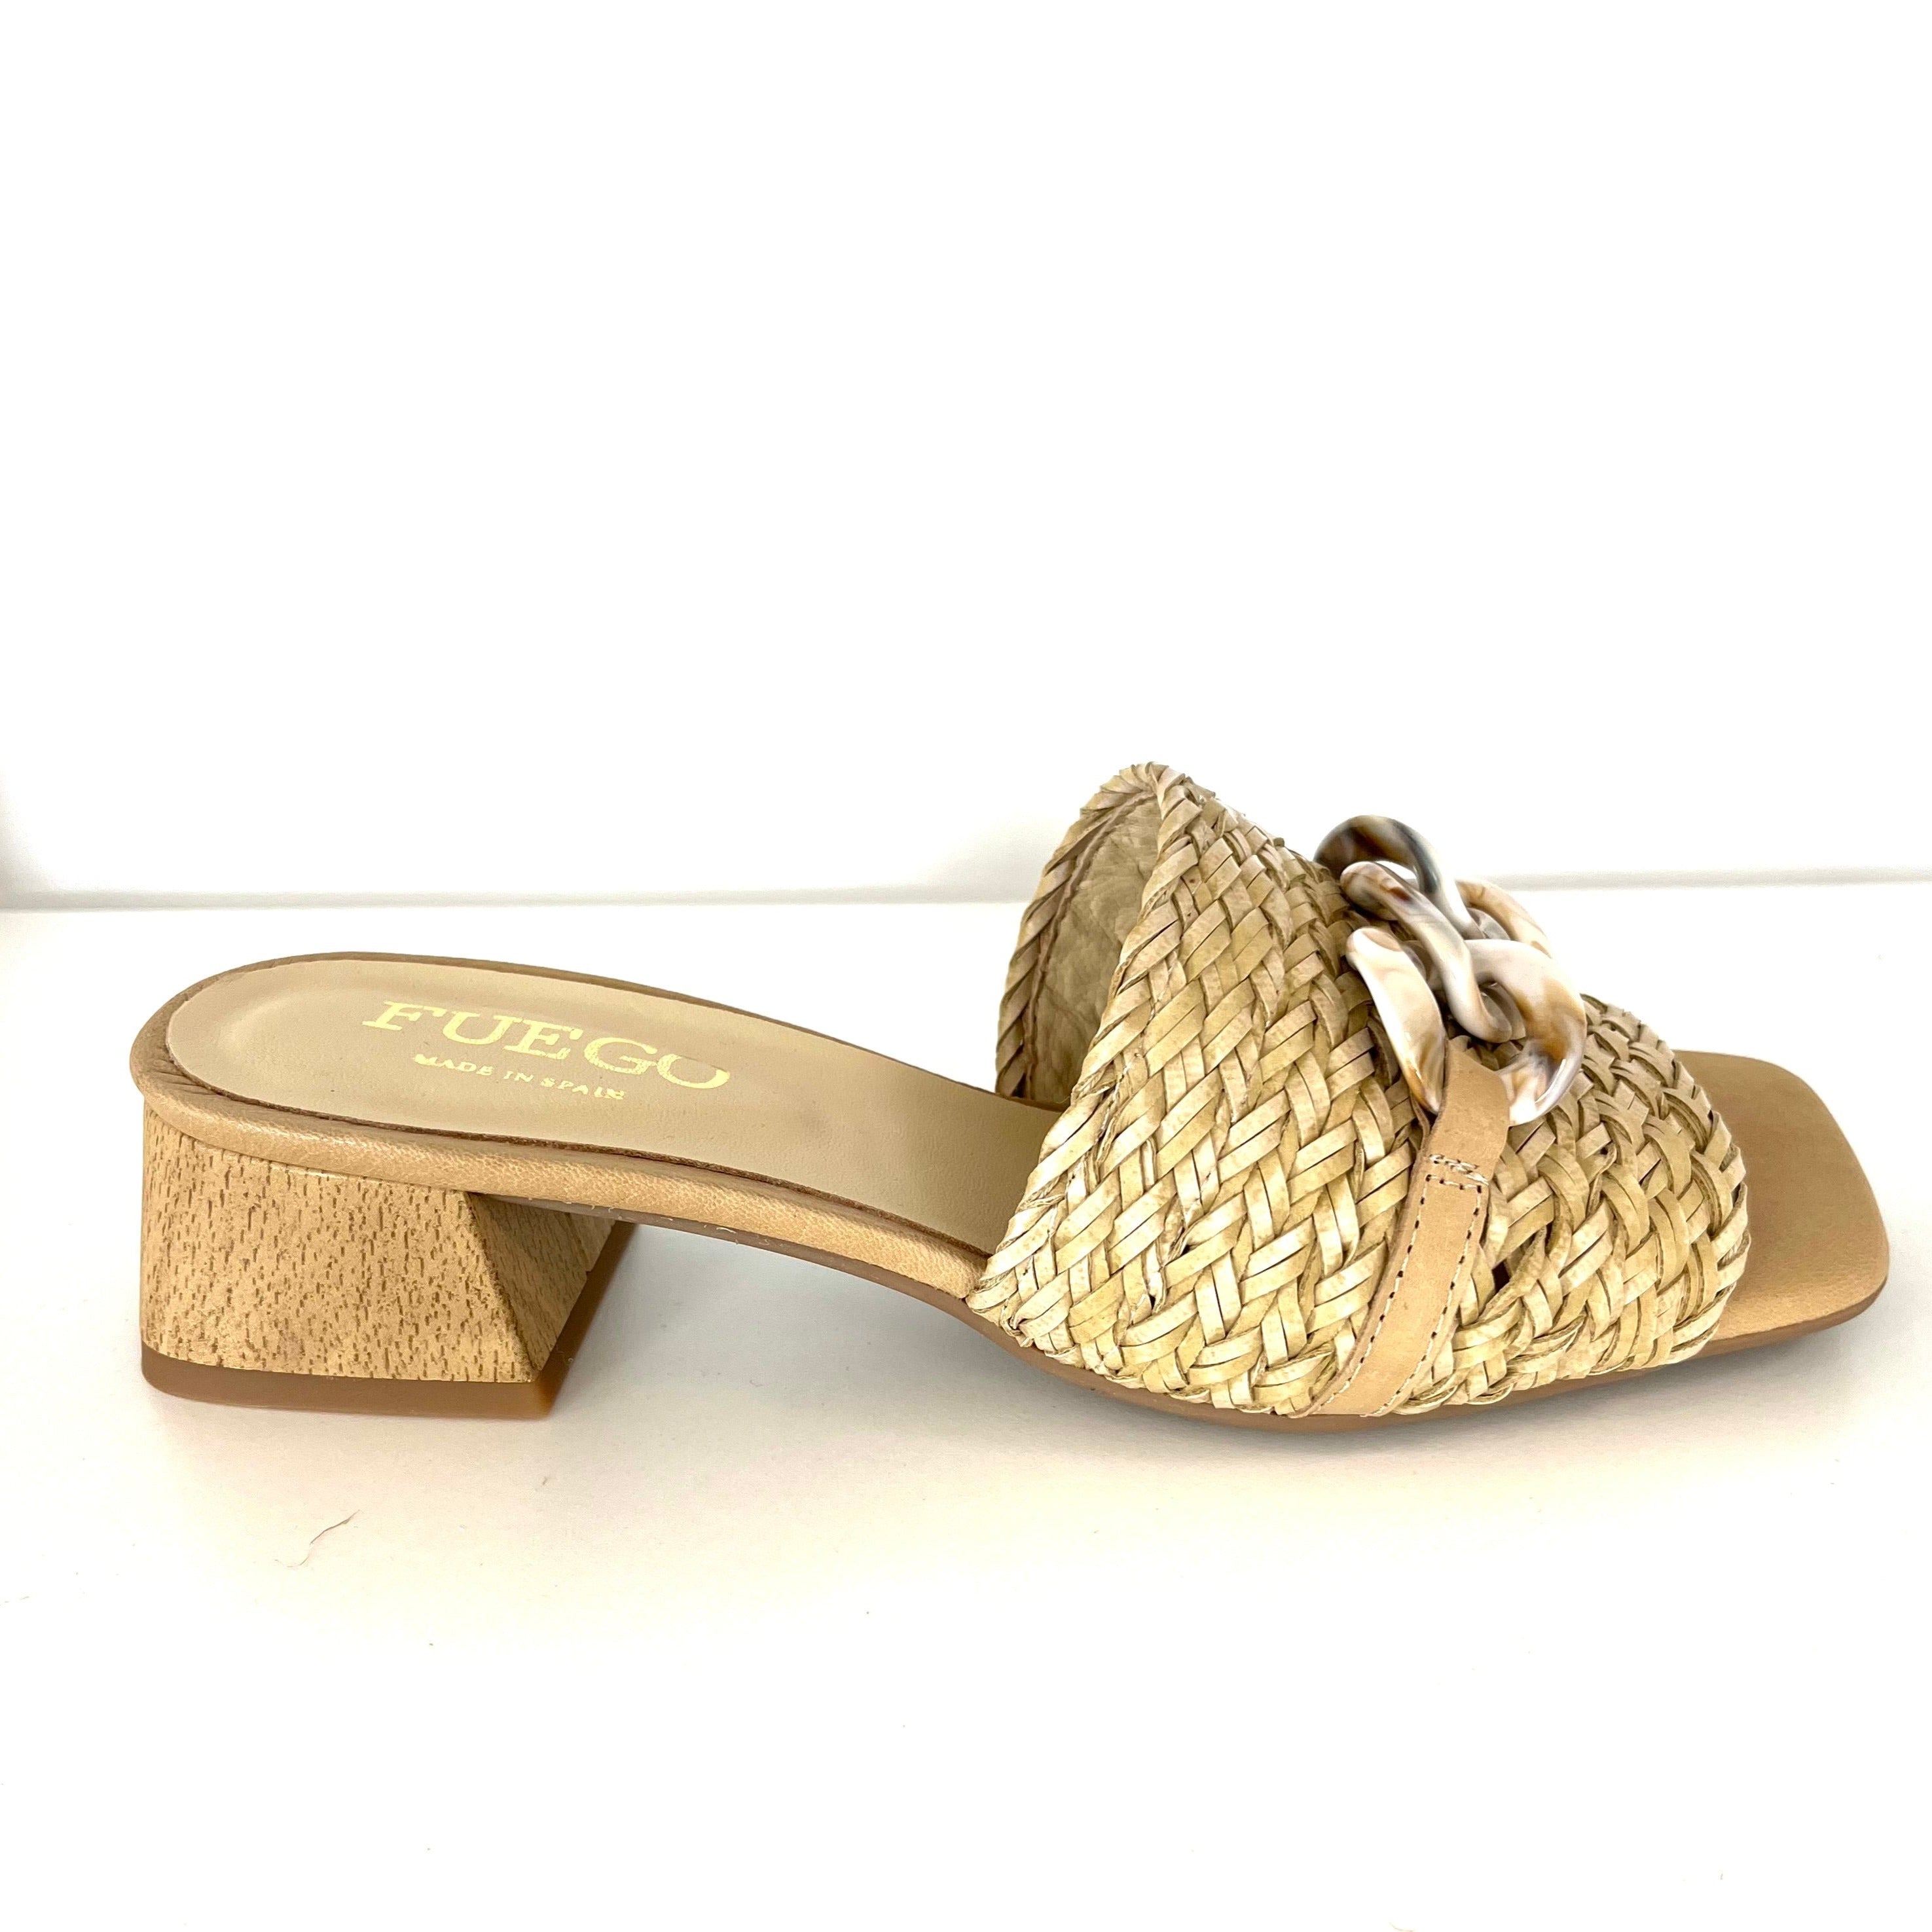 The Woven Leather Slide Sandal with Resin Chain in Natural